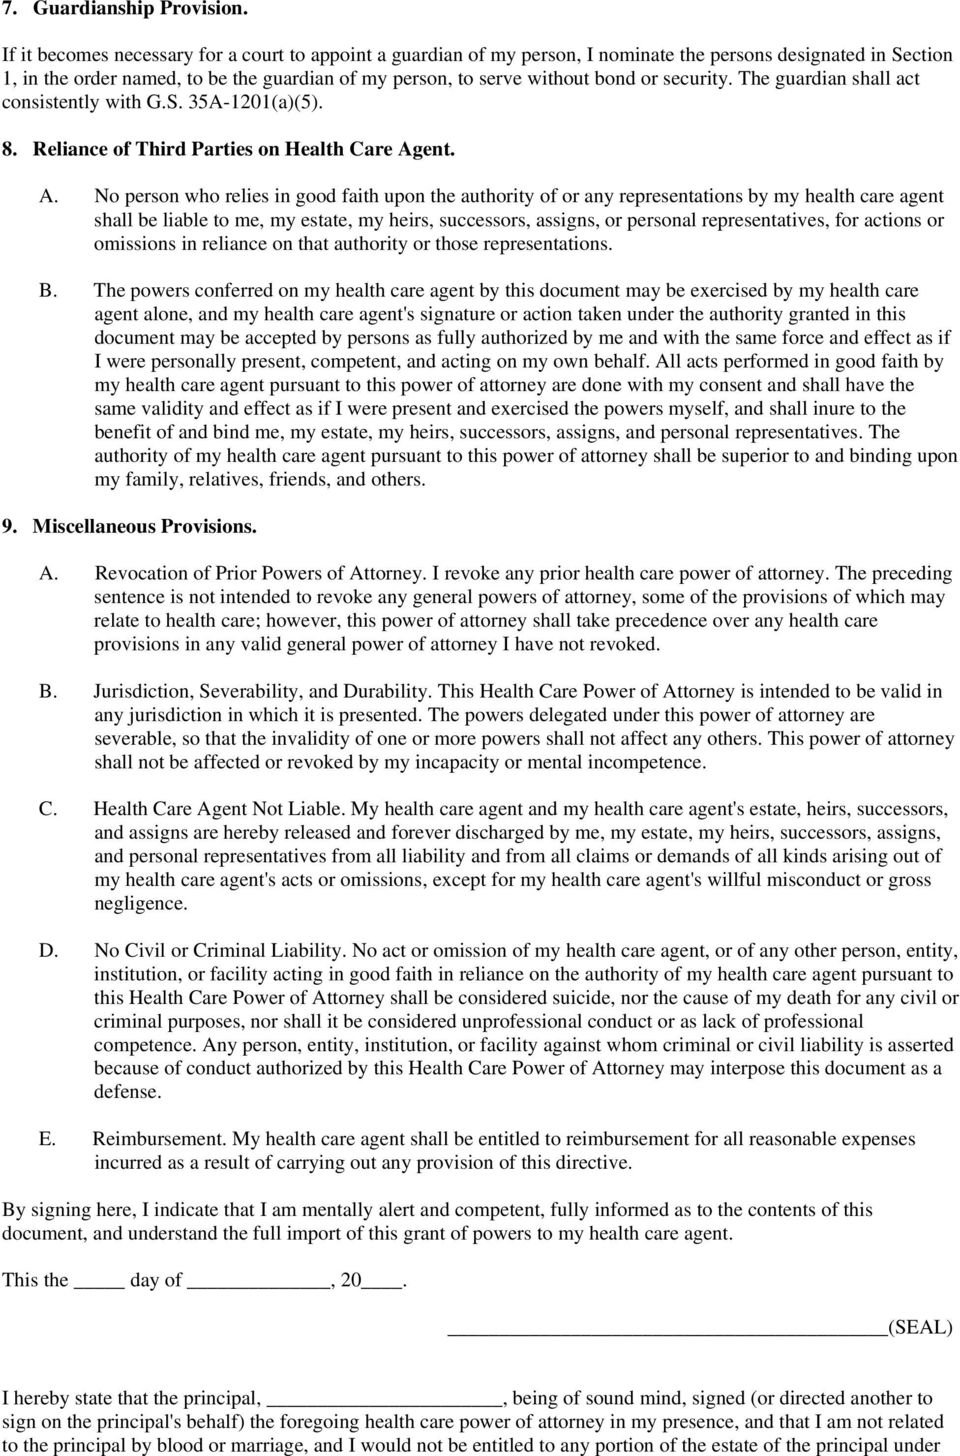 security. The guardian shall act consistently with G.S. 35A-1201(a)(5). 8. Reliance of Third Parties on Health Care Ag